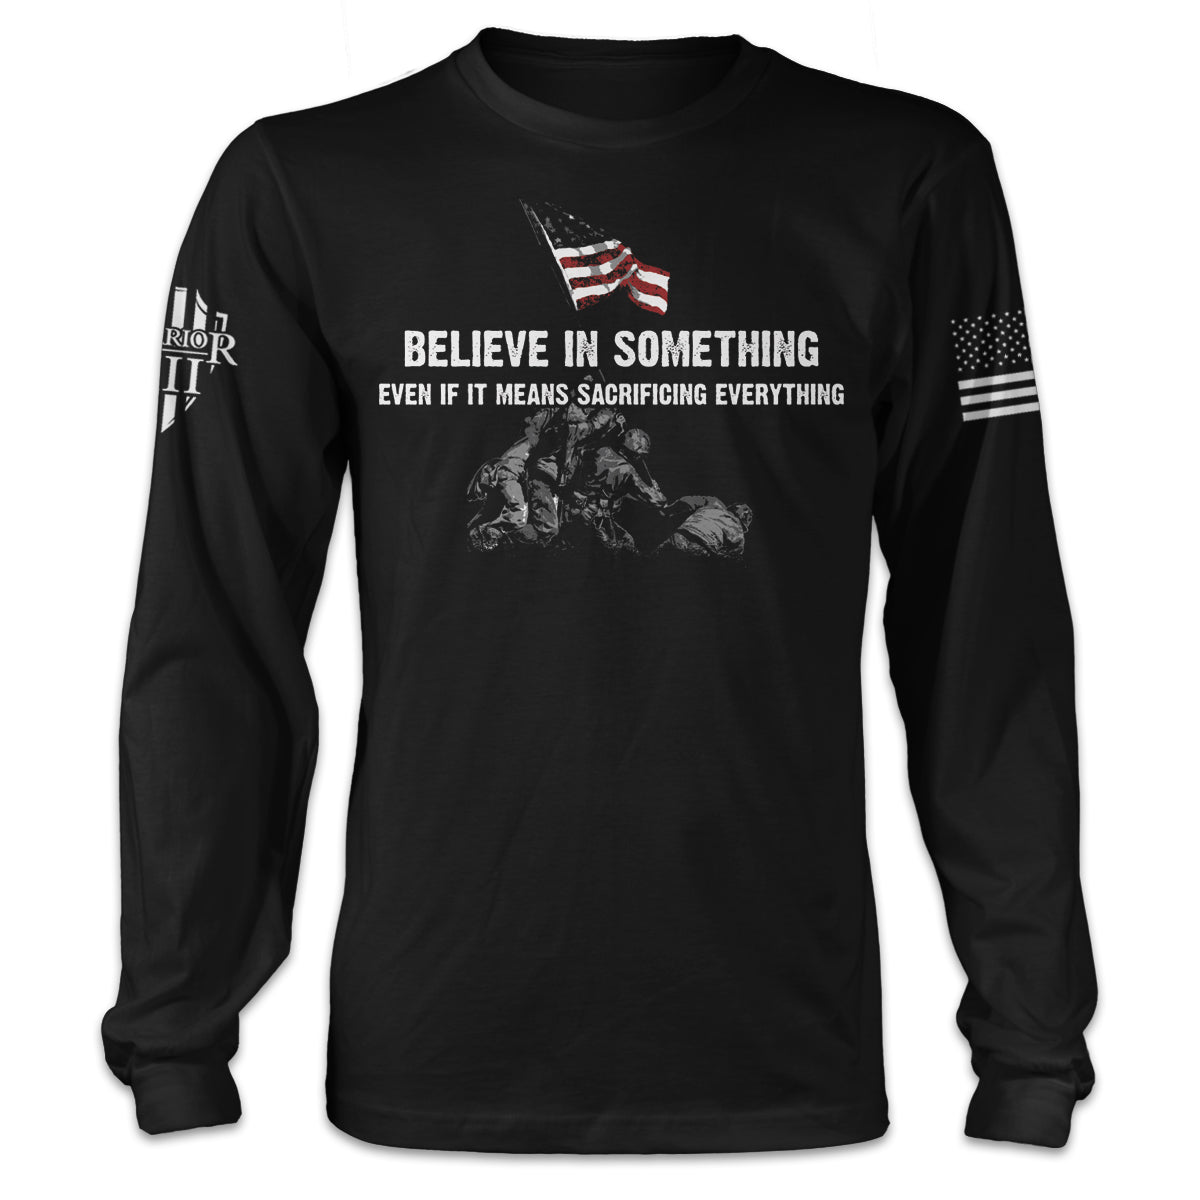 A black long sleeve shirt with the words "Believe In Something, Even If It Means Sacrificing Everything" with soldiers putting up the American flag printed on the front of the shirt.